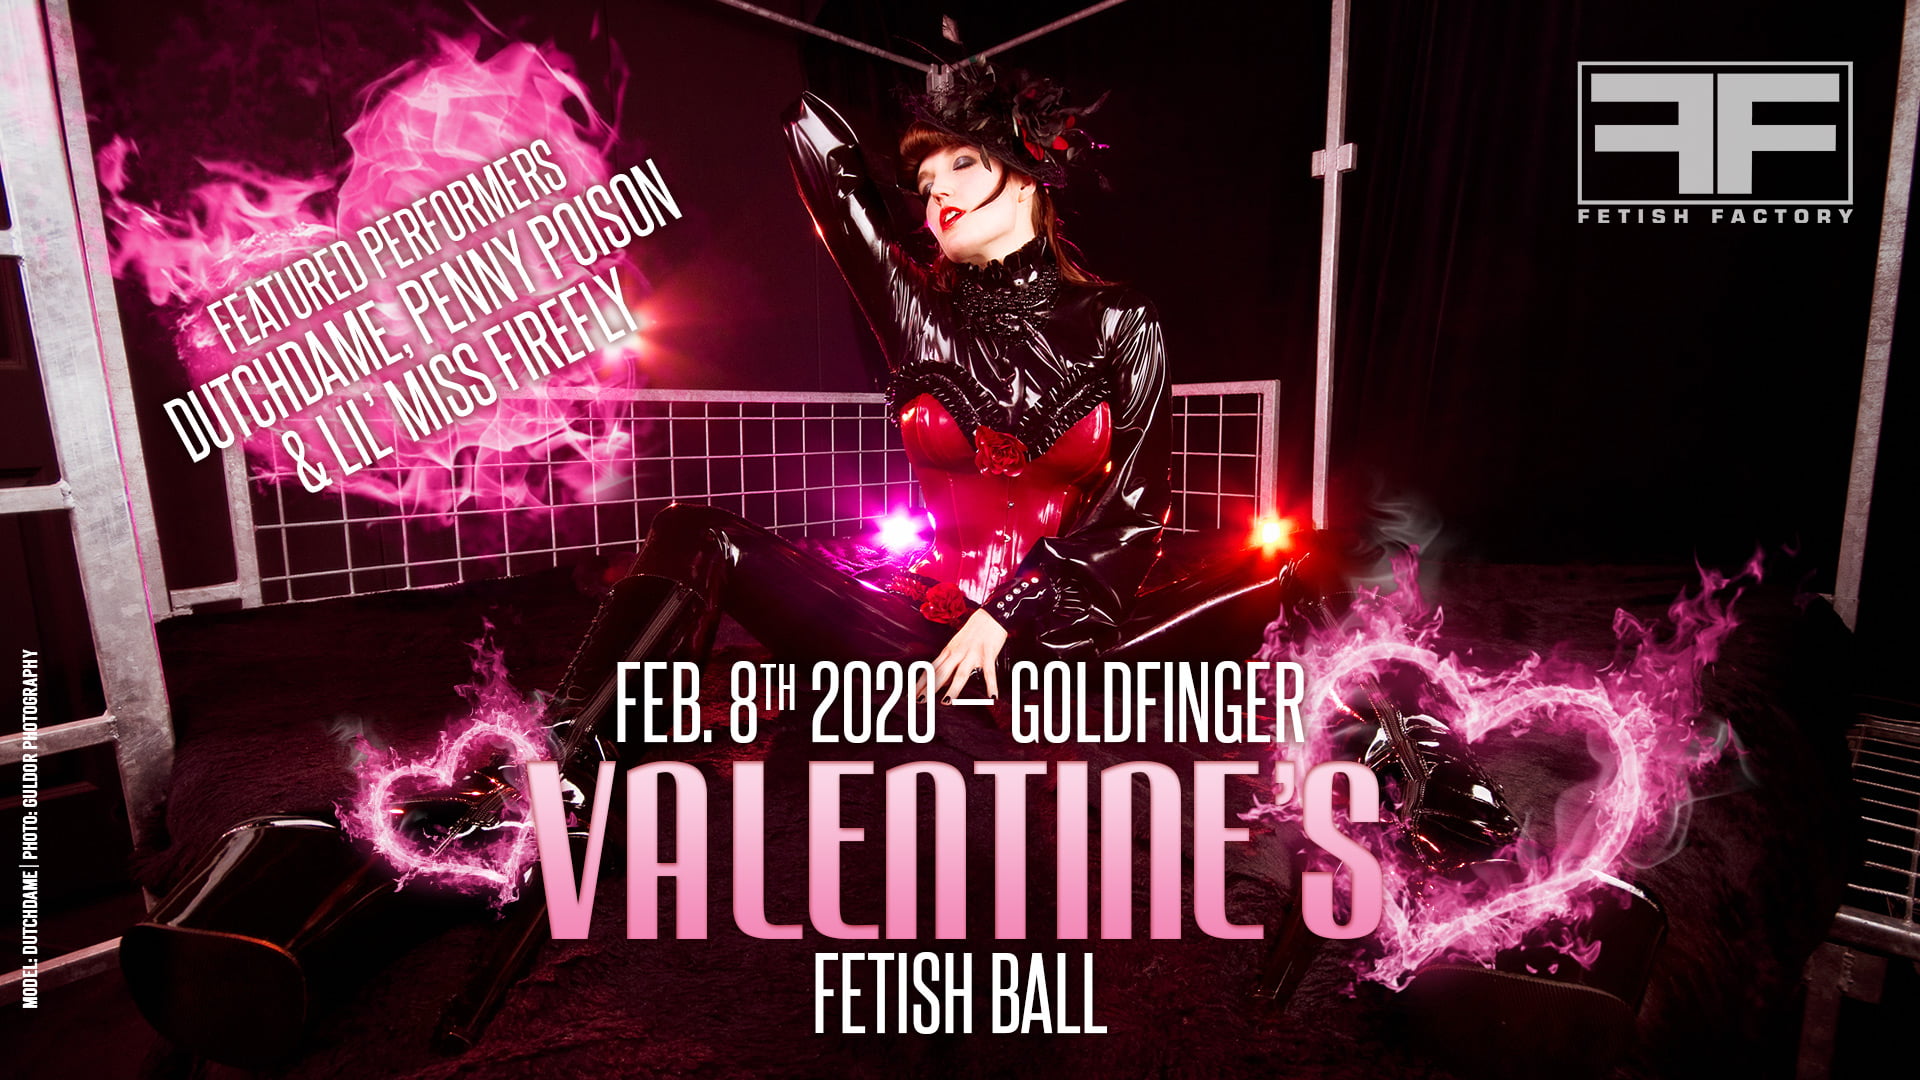 Fetish Factory's Valentine's Fetish Ball February 8 2020 featuring DutchDame, Penny Poison, and Lil' Miss Firefly